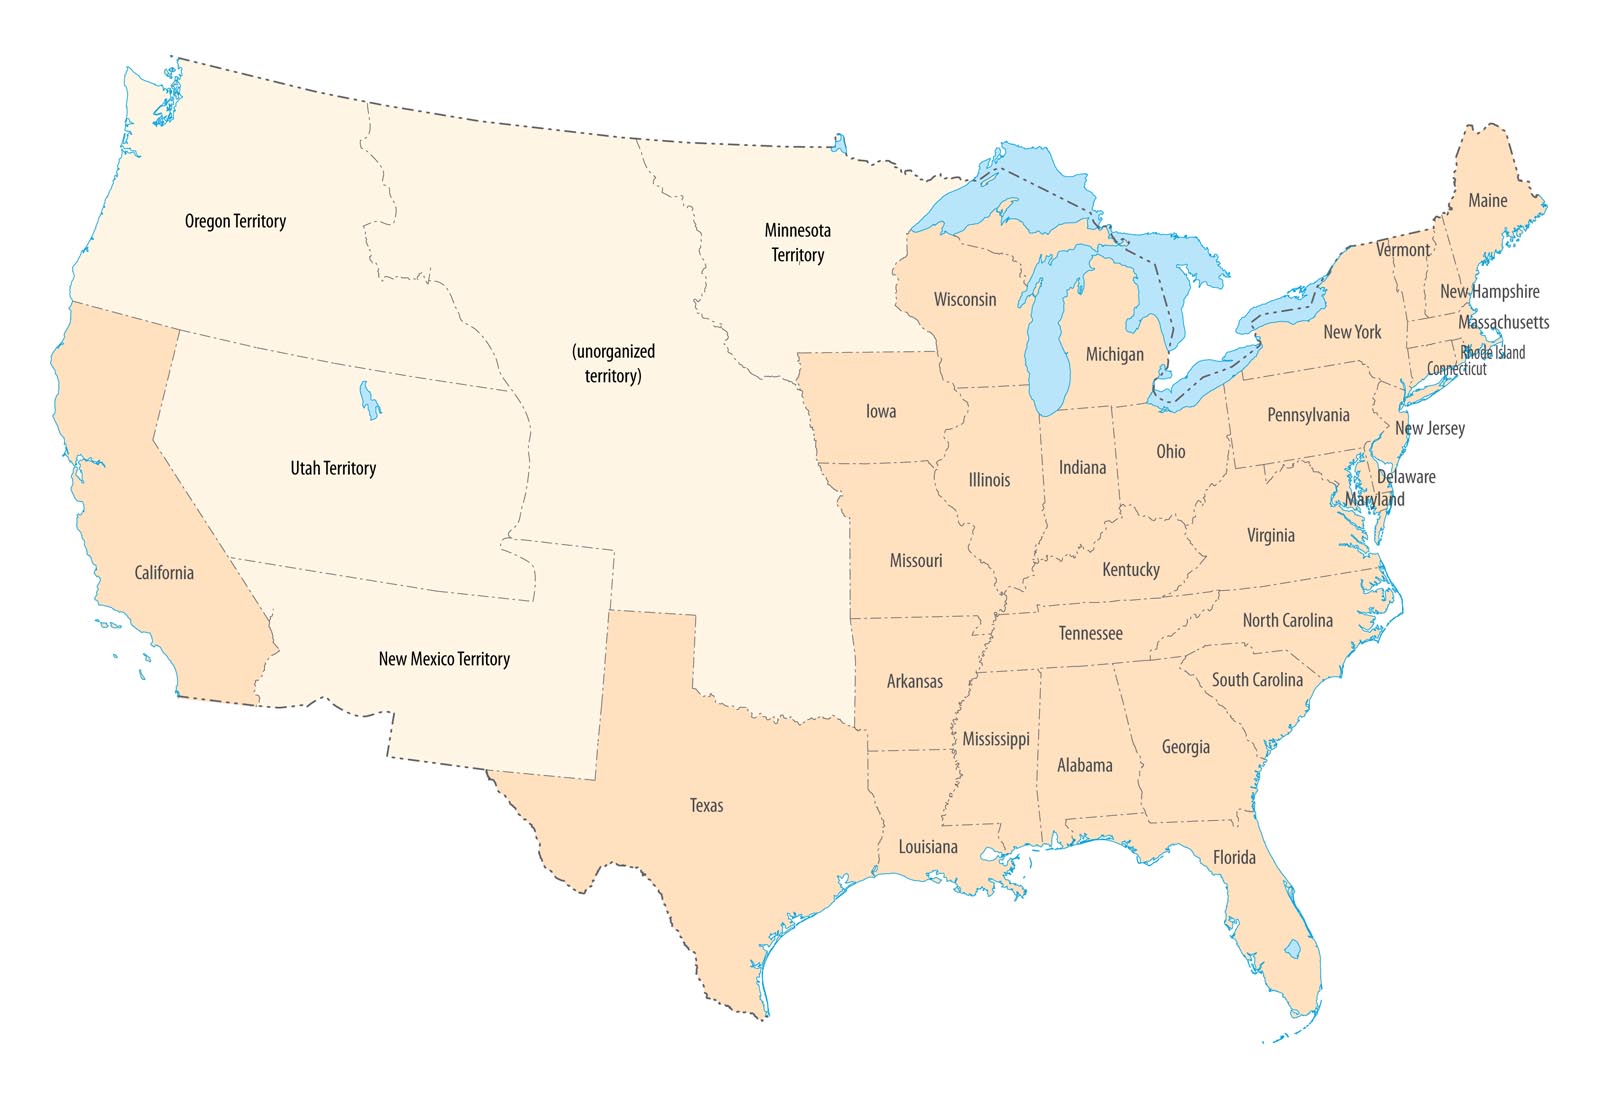 The United States and territories in 1850